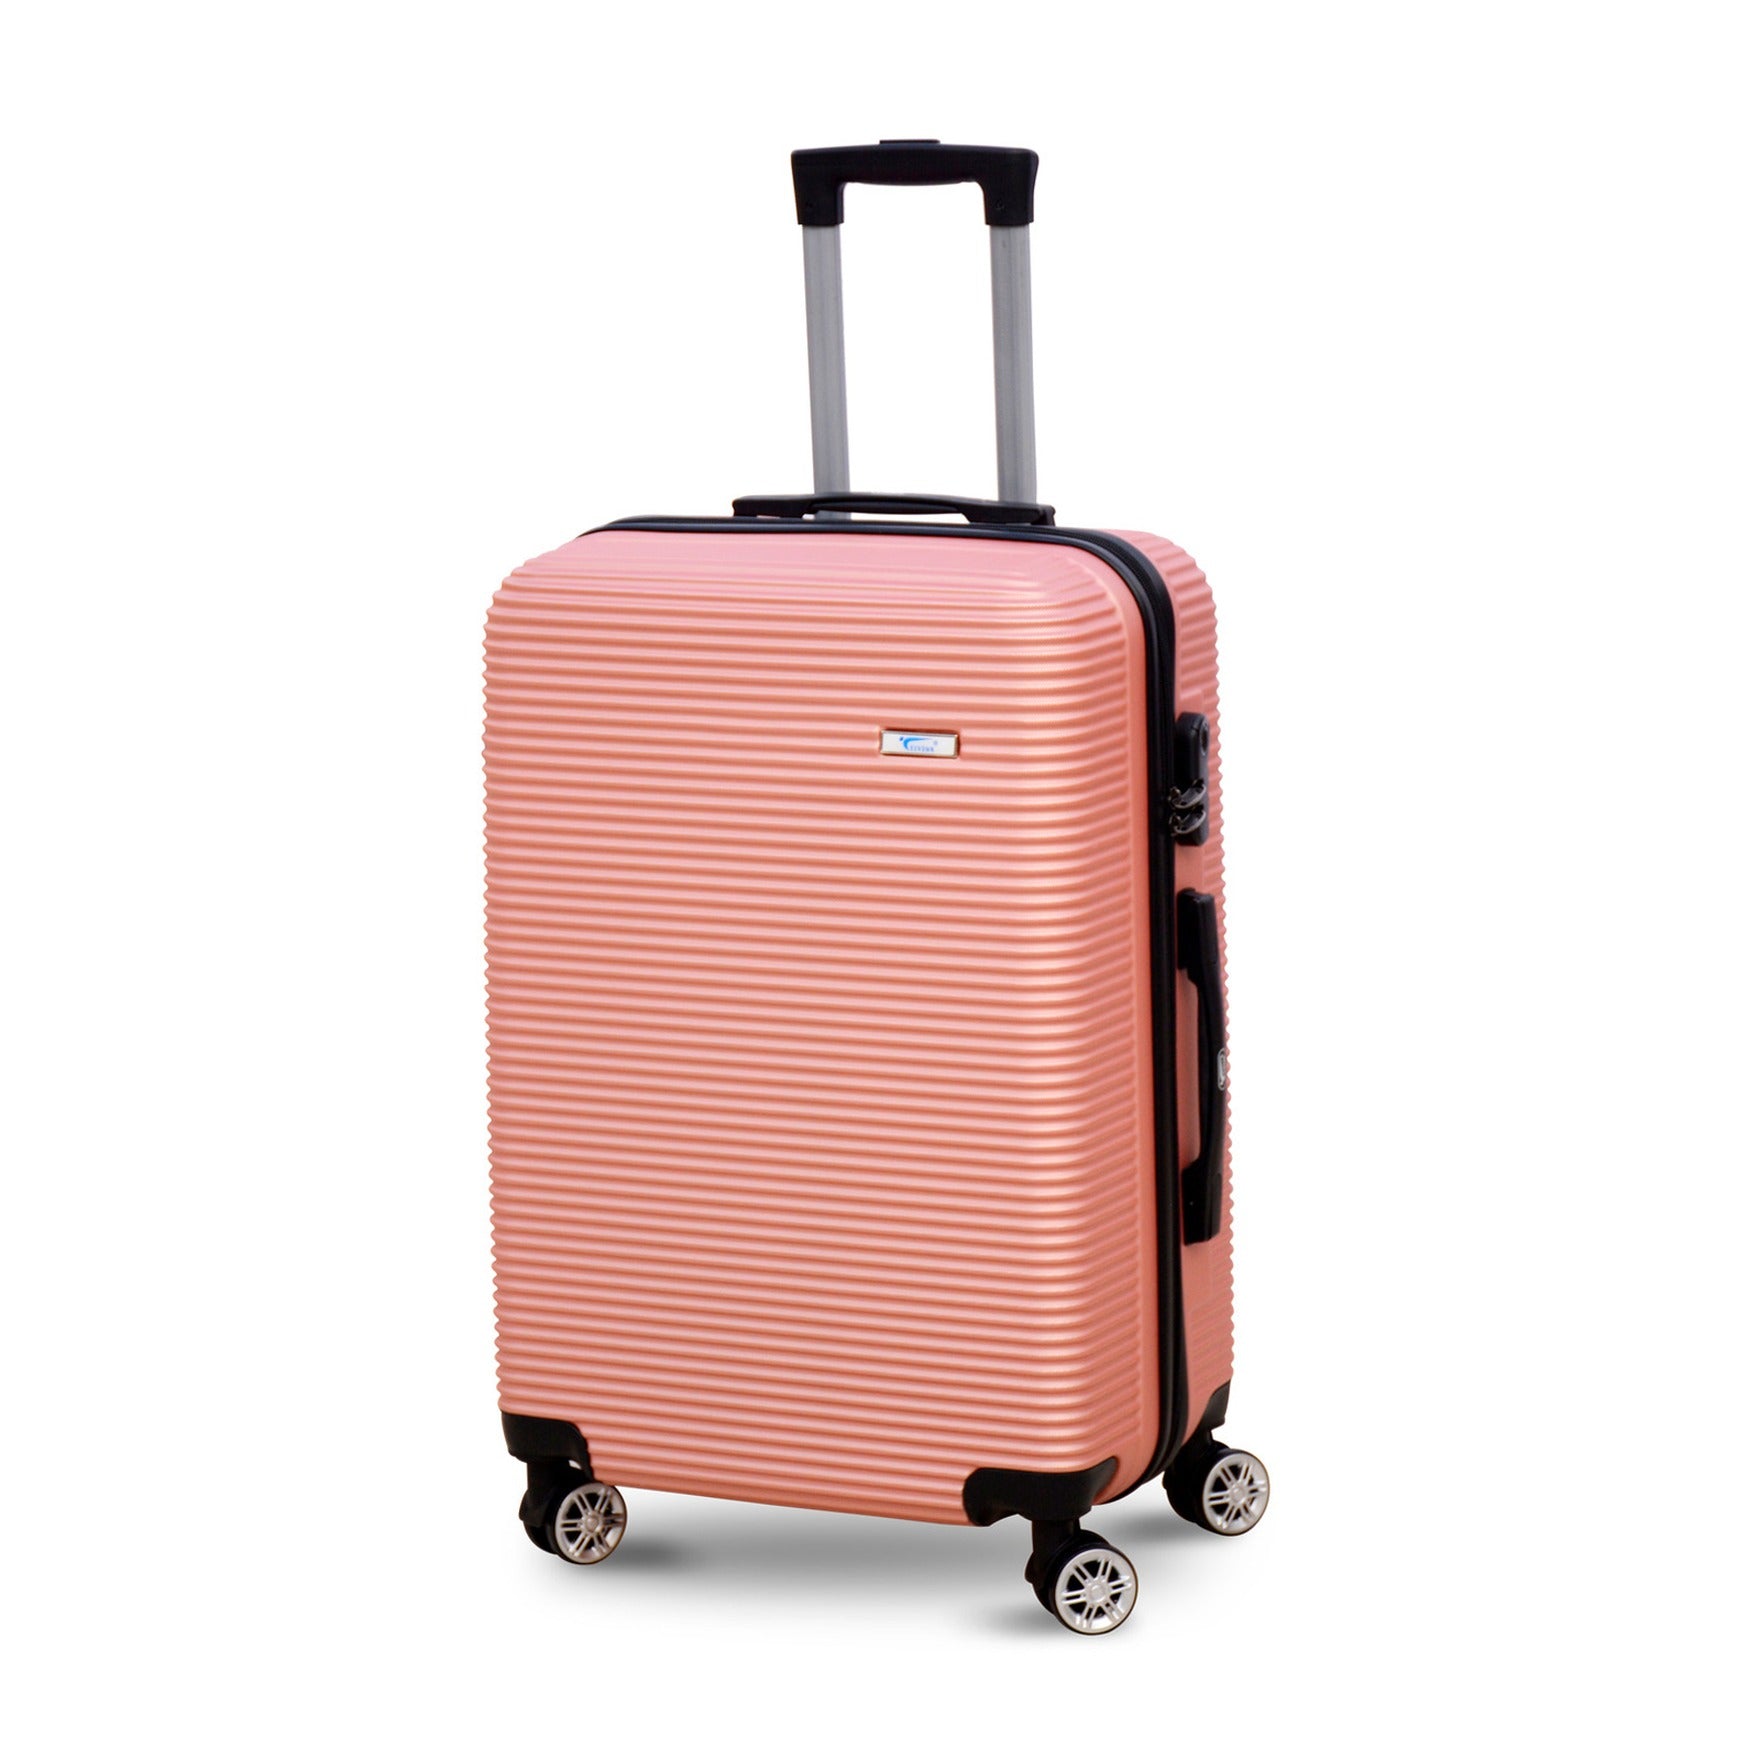 20" Dark Pink Colour JIAN ABS Line Luggage Lightweight Hard Case Carry On Trolley Bag With Spinner Wheel Zaappy.com